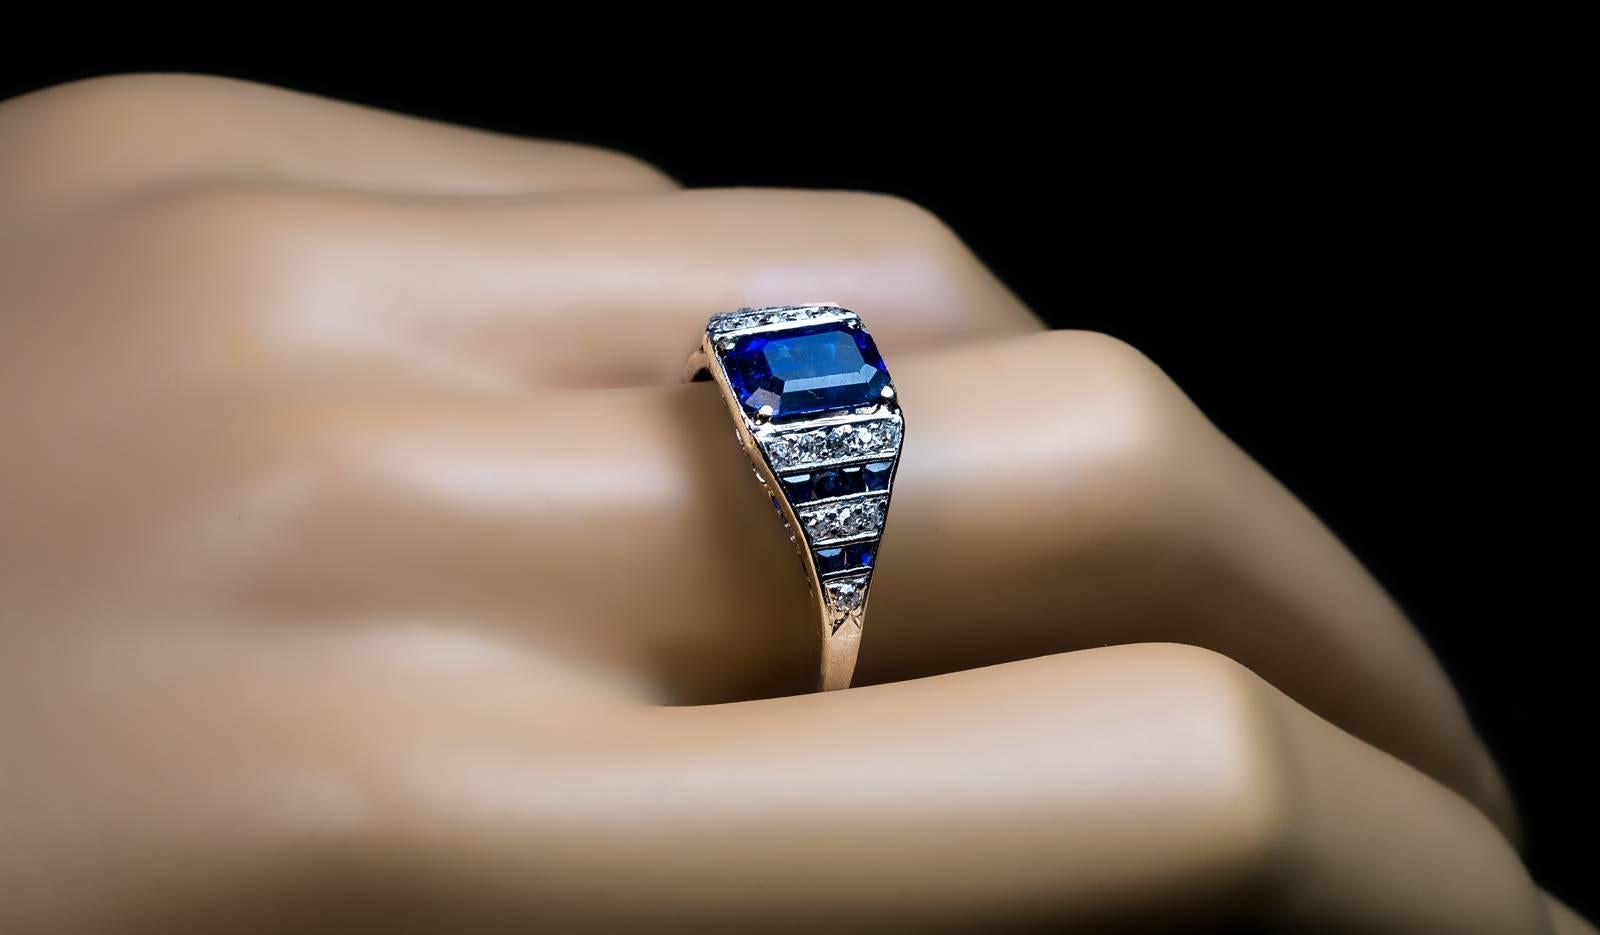 Circa 1920

A platinum hand-crafted ring is centered with an emerald cut natural sapphire (8.2 x 5.85 x 4.4 mm, approximately 2.11 ct) of a beautiful cornflower blue color.

The shoulders of the ring are vertically channel set with old single